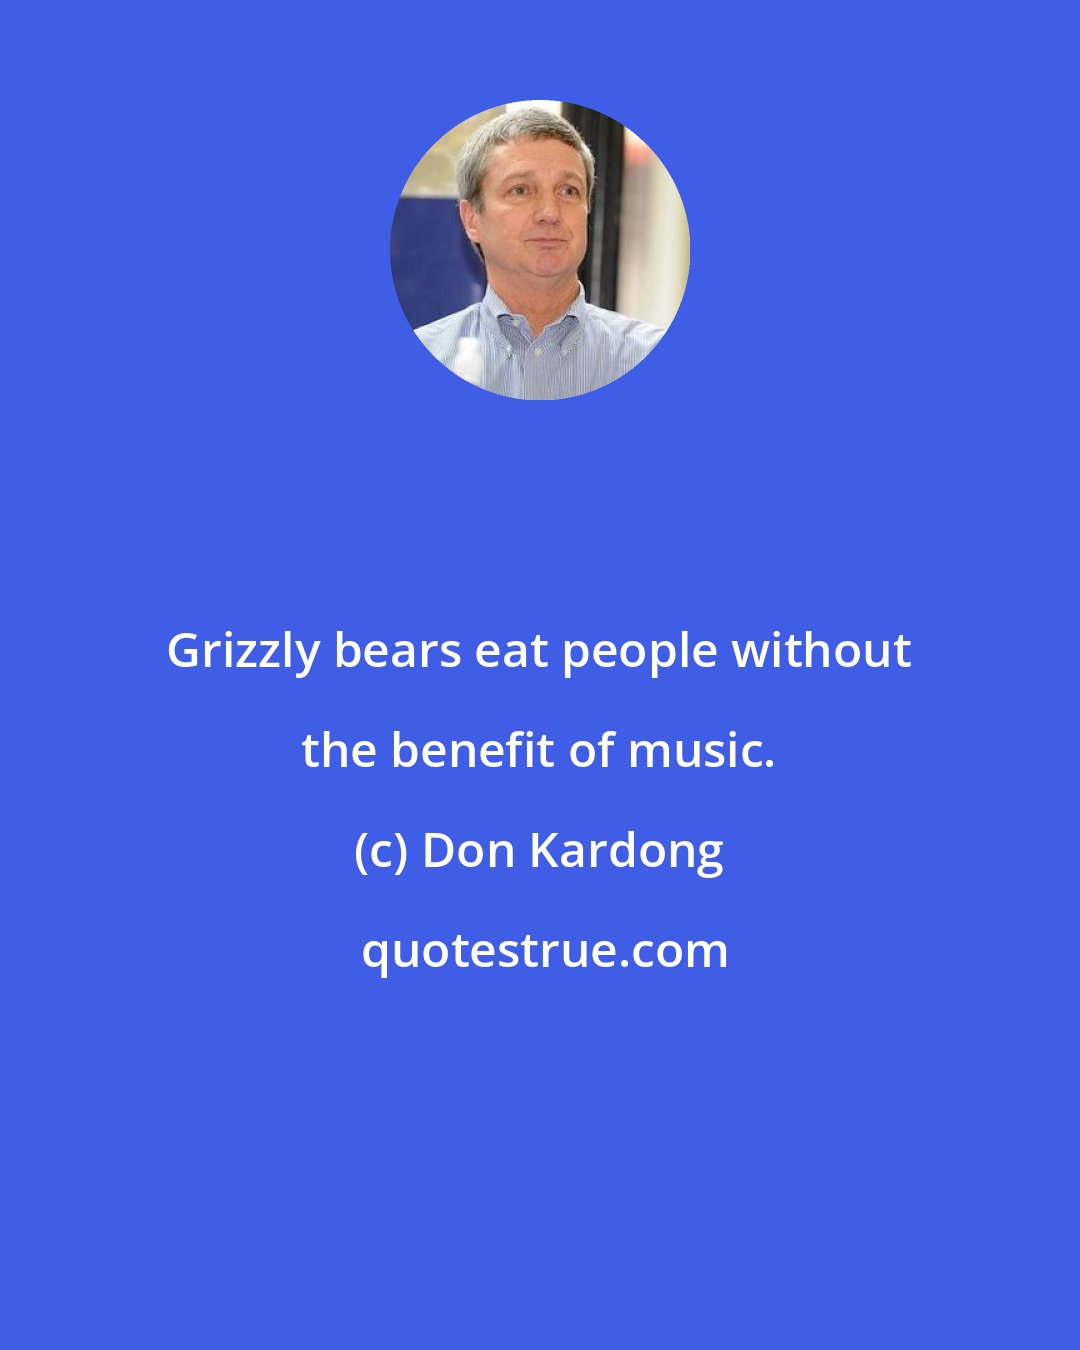 Don Kardong: Grizzly bears eat people without the benefit of music.